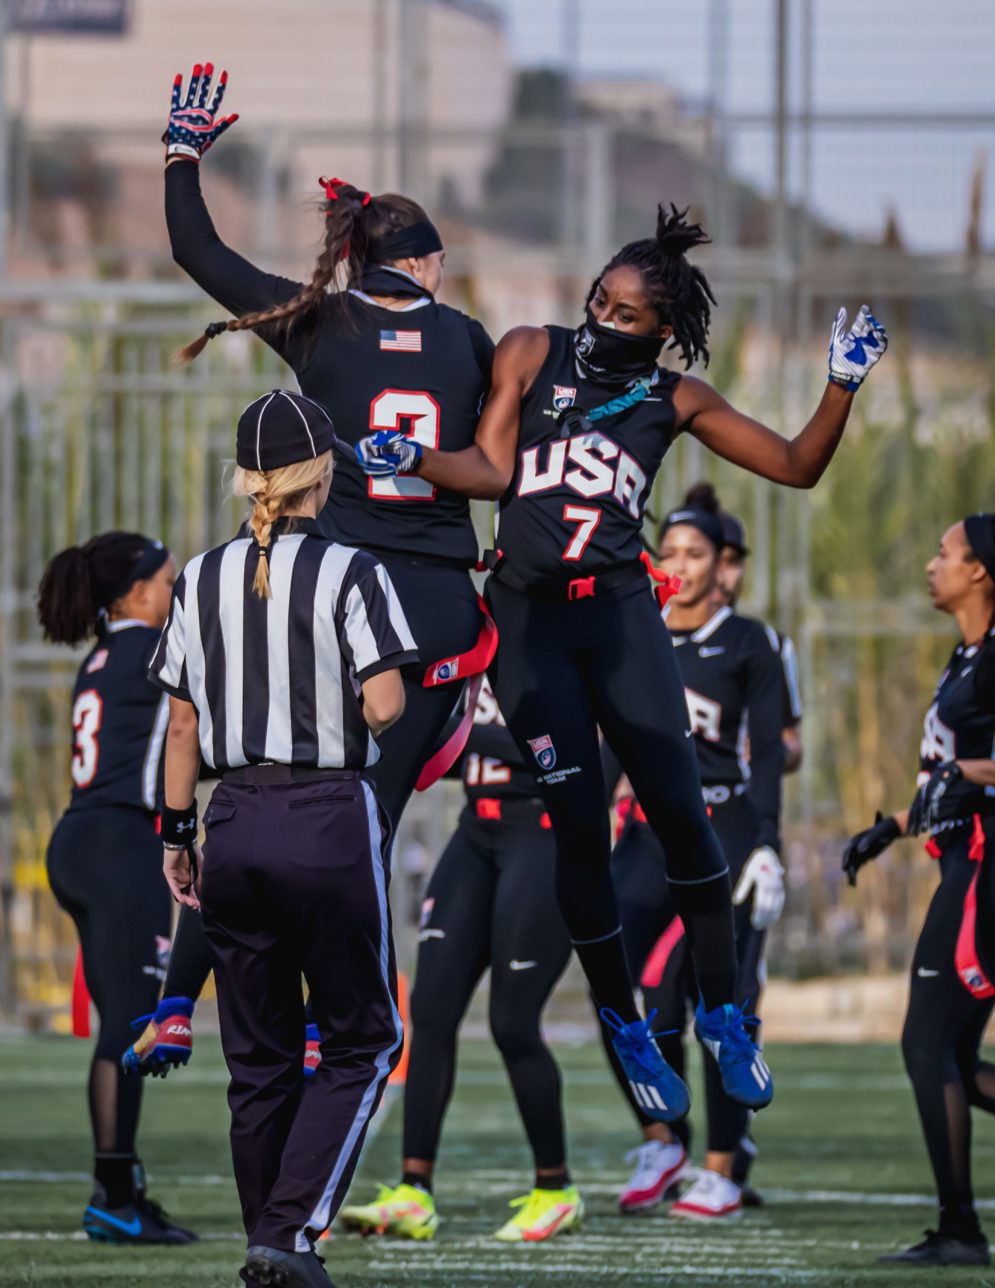 USA Football is the American governing body for both flag and tackle football. USA Football sponsors national teams at youth and adult levels — leading player scouting, training, and development. Learn more about the U.S. National Football Team.&#160;